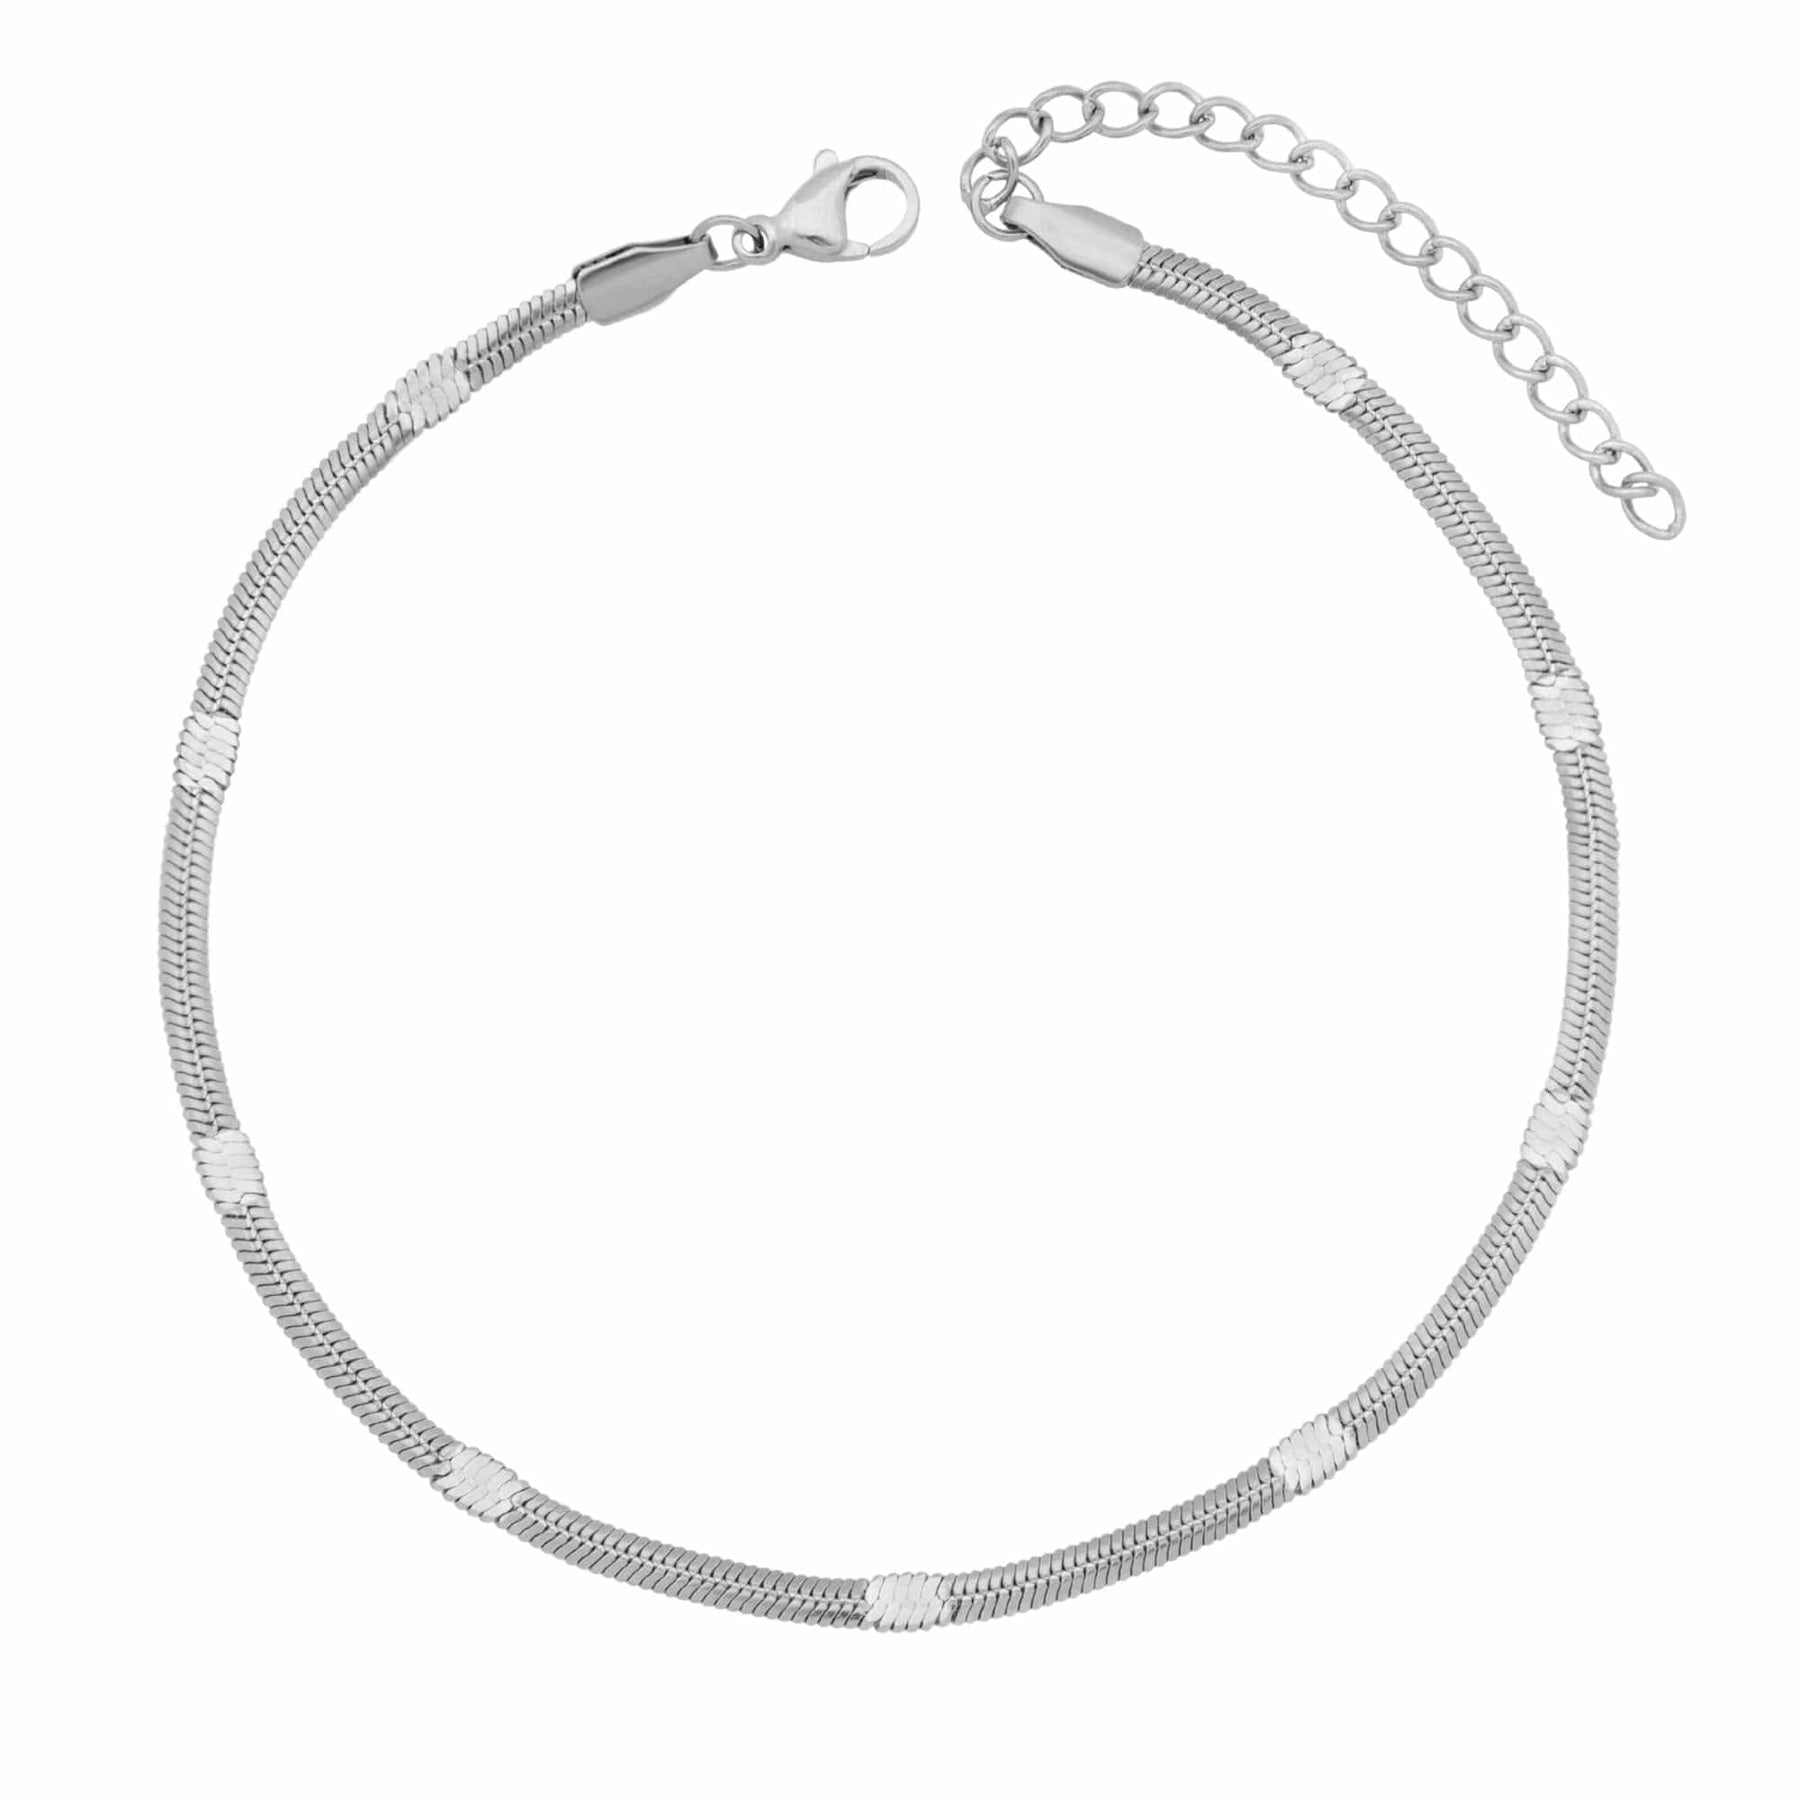 BohoMoon Stainless Steel Flora Anklet Silver